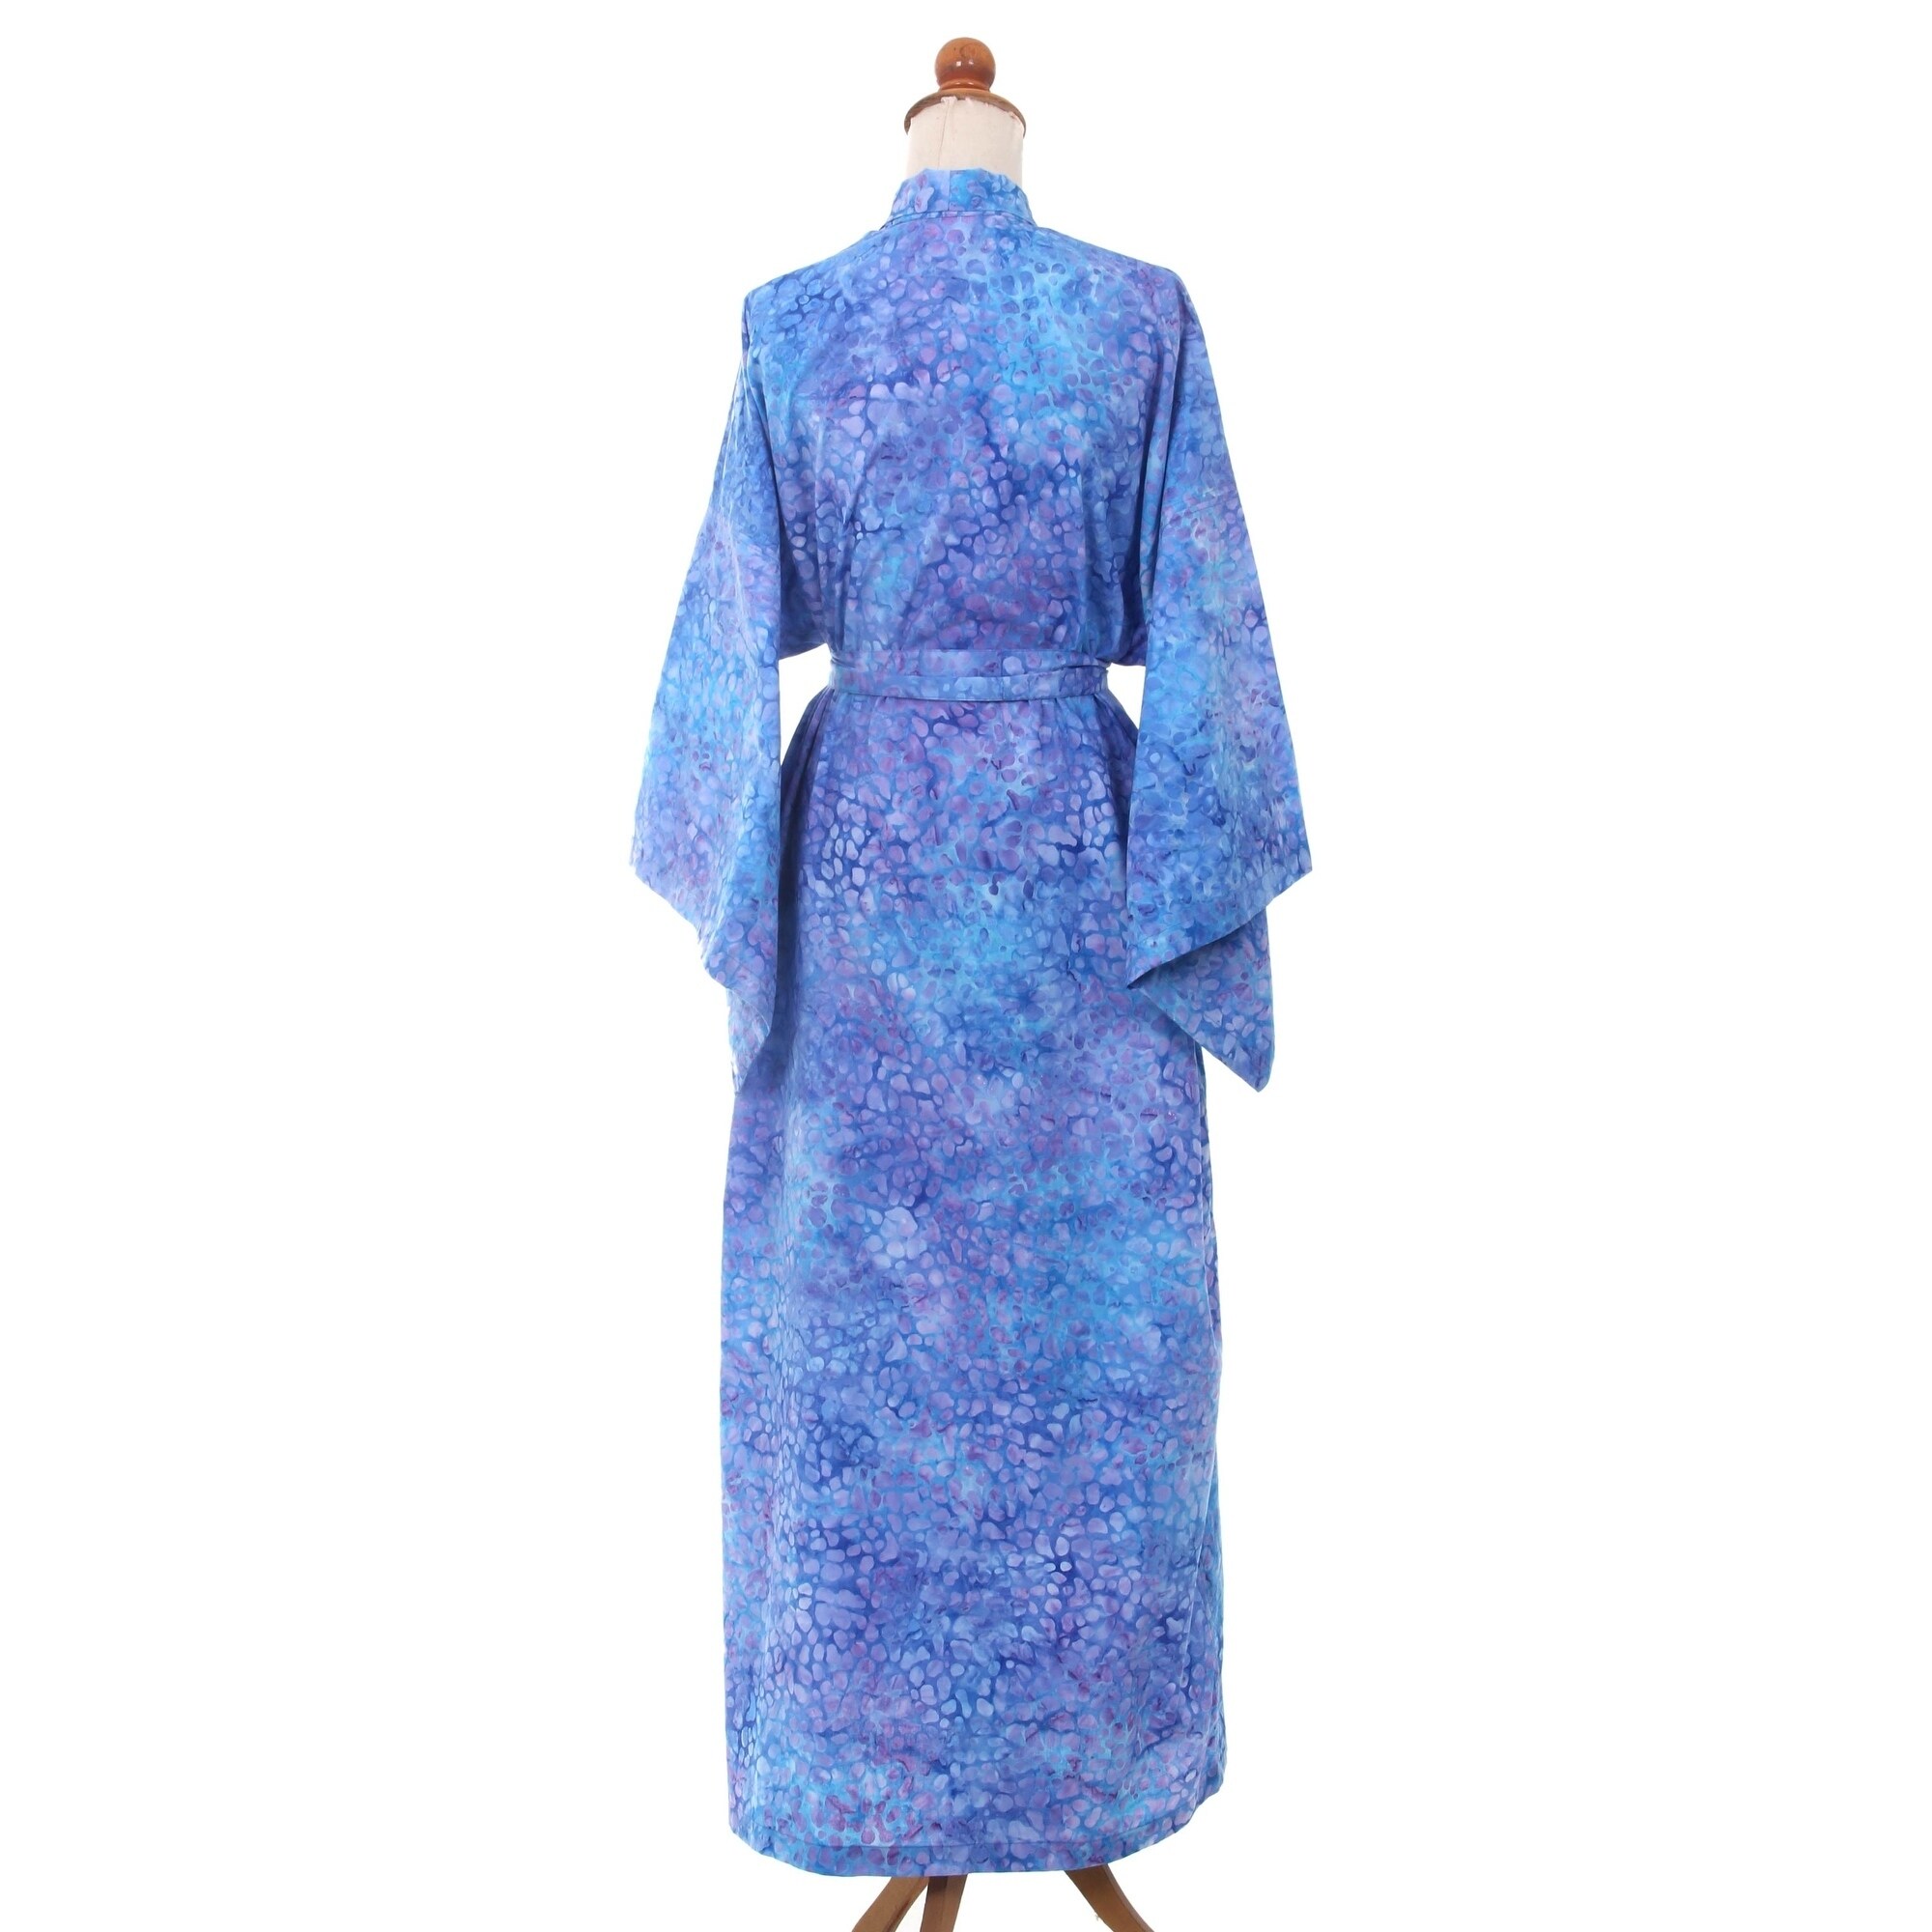 Made in Portugal batik robe 100/% cotton luxury high quality super soft authentic batik wear like a kimono or dress belted tie front mid calf